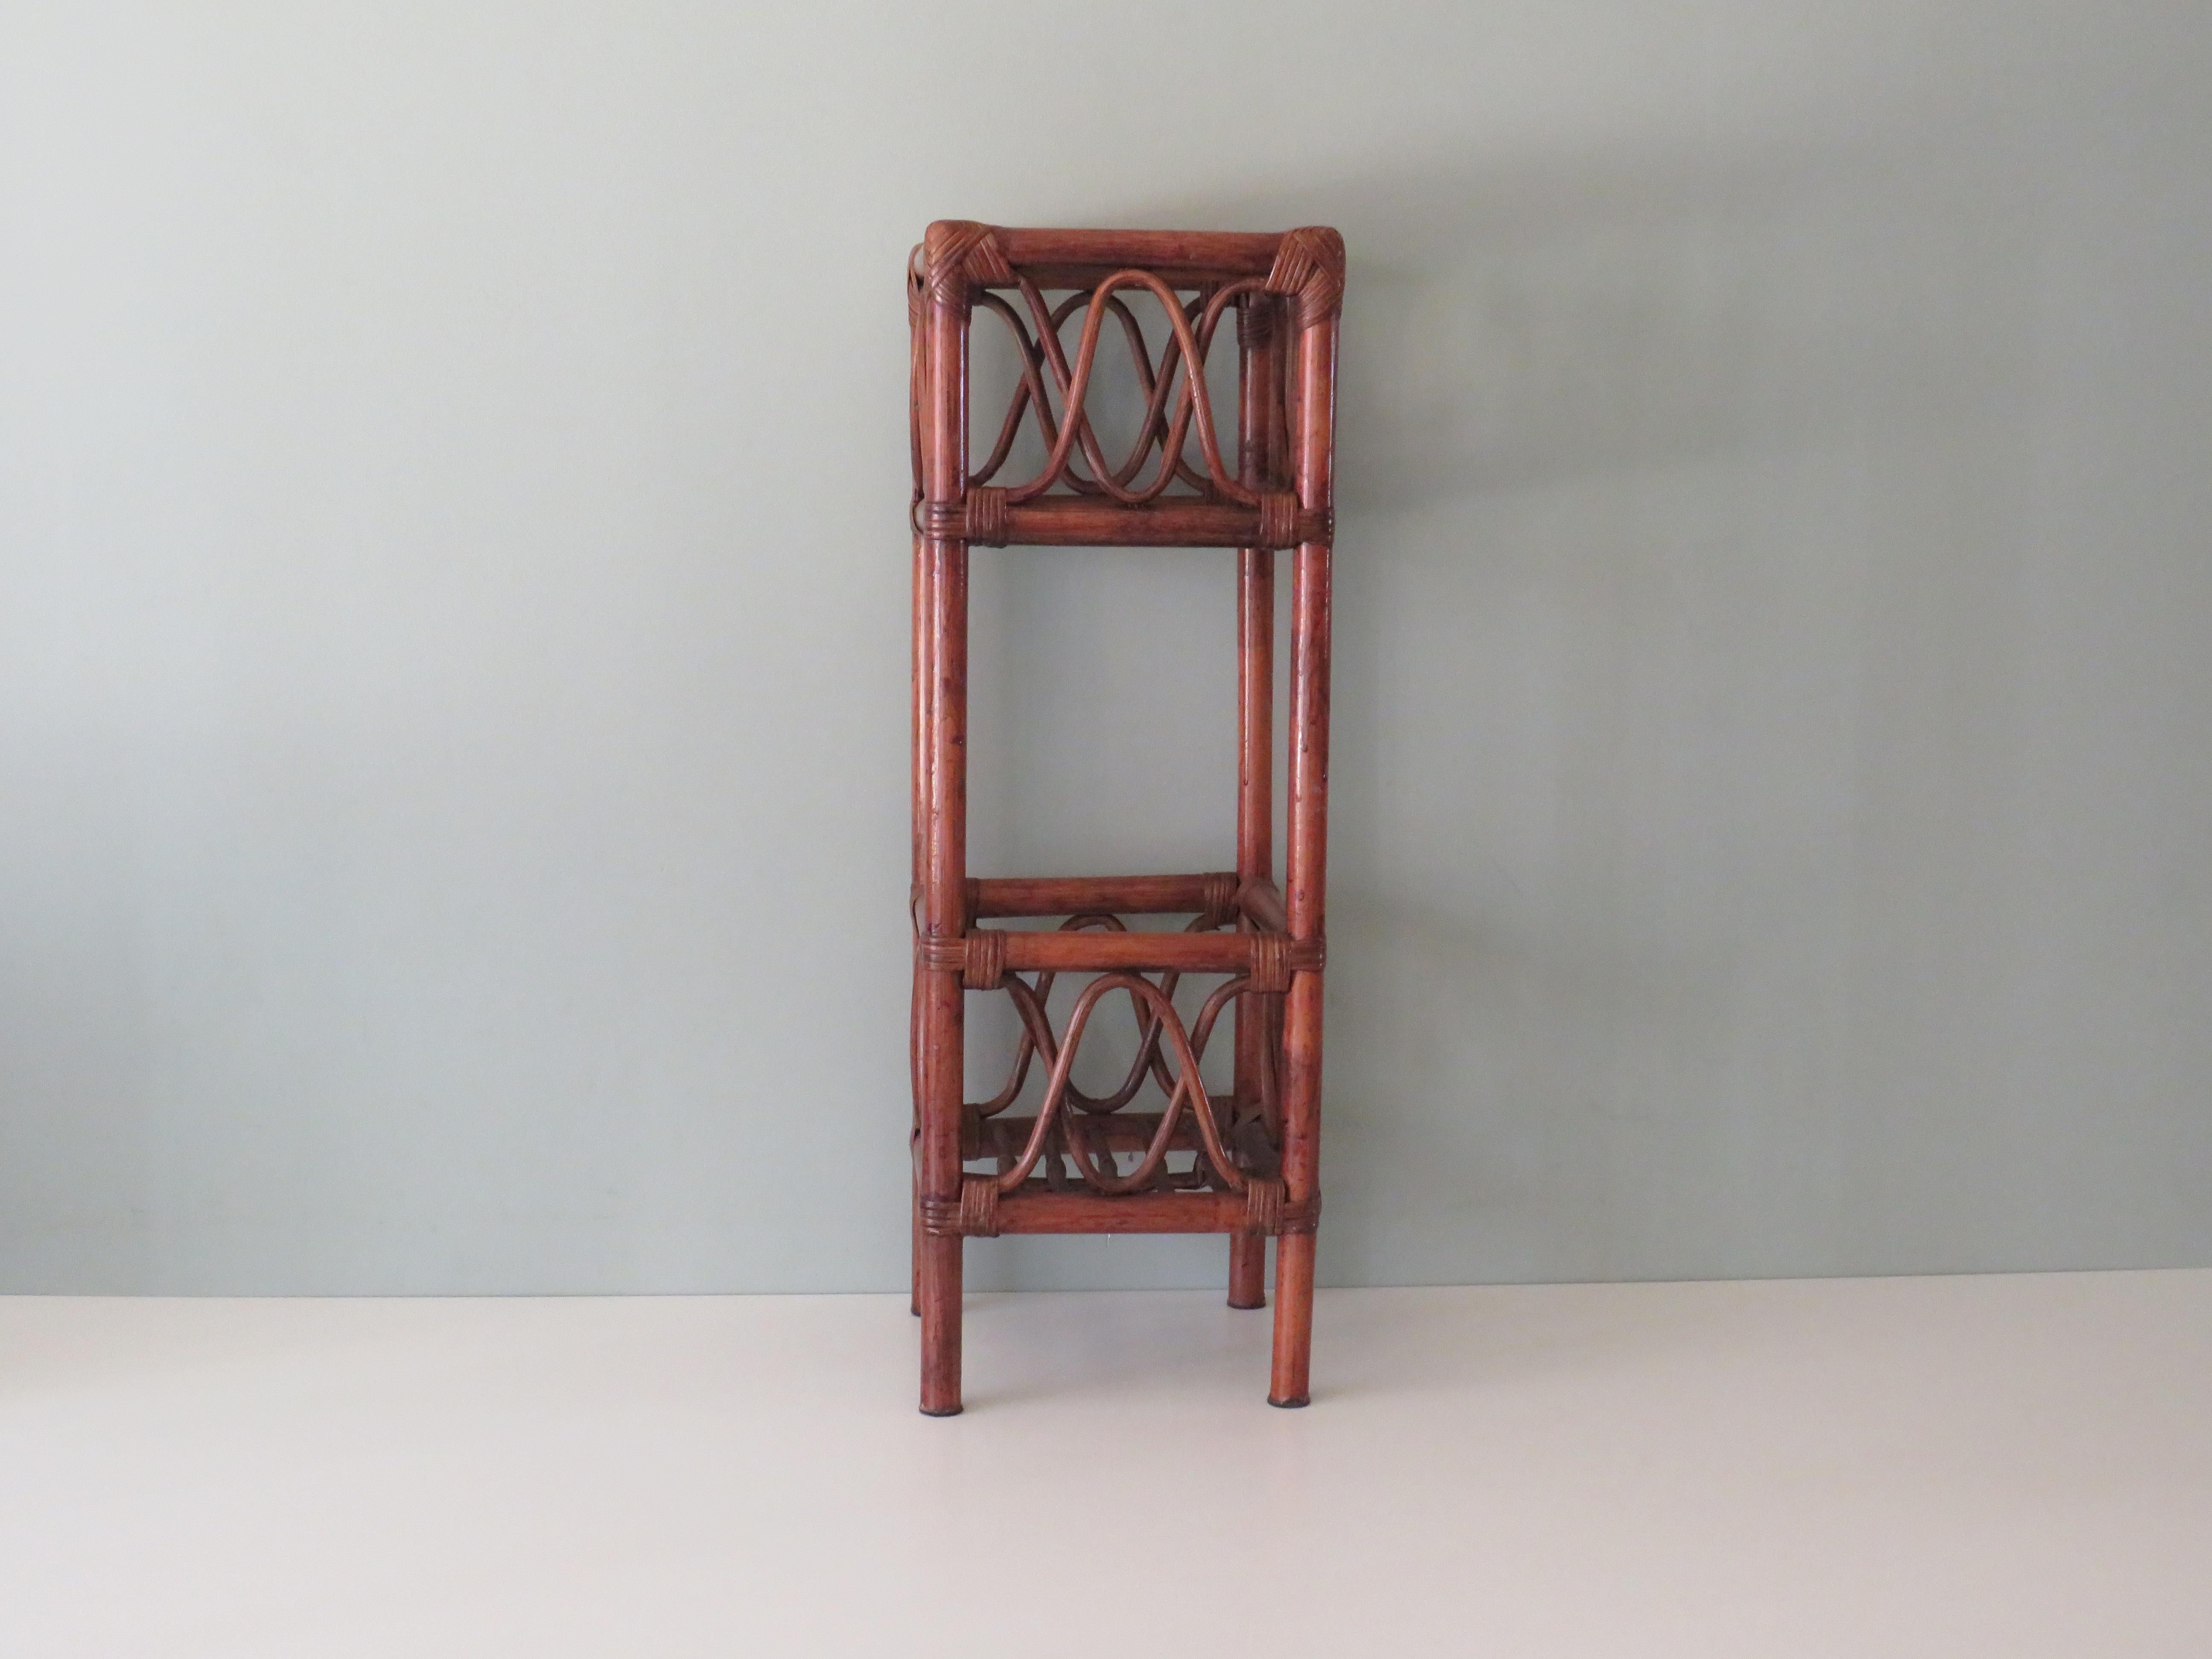 Bohemian pedestal, high bamboo plant stand, Italy, 1970s.
High plant stand made of varnished bamboo, with a bamboo rack at the bottom and the top is finished with woven rattan.
The side table is in good condition and the height is 75 cm, width x